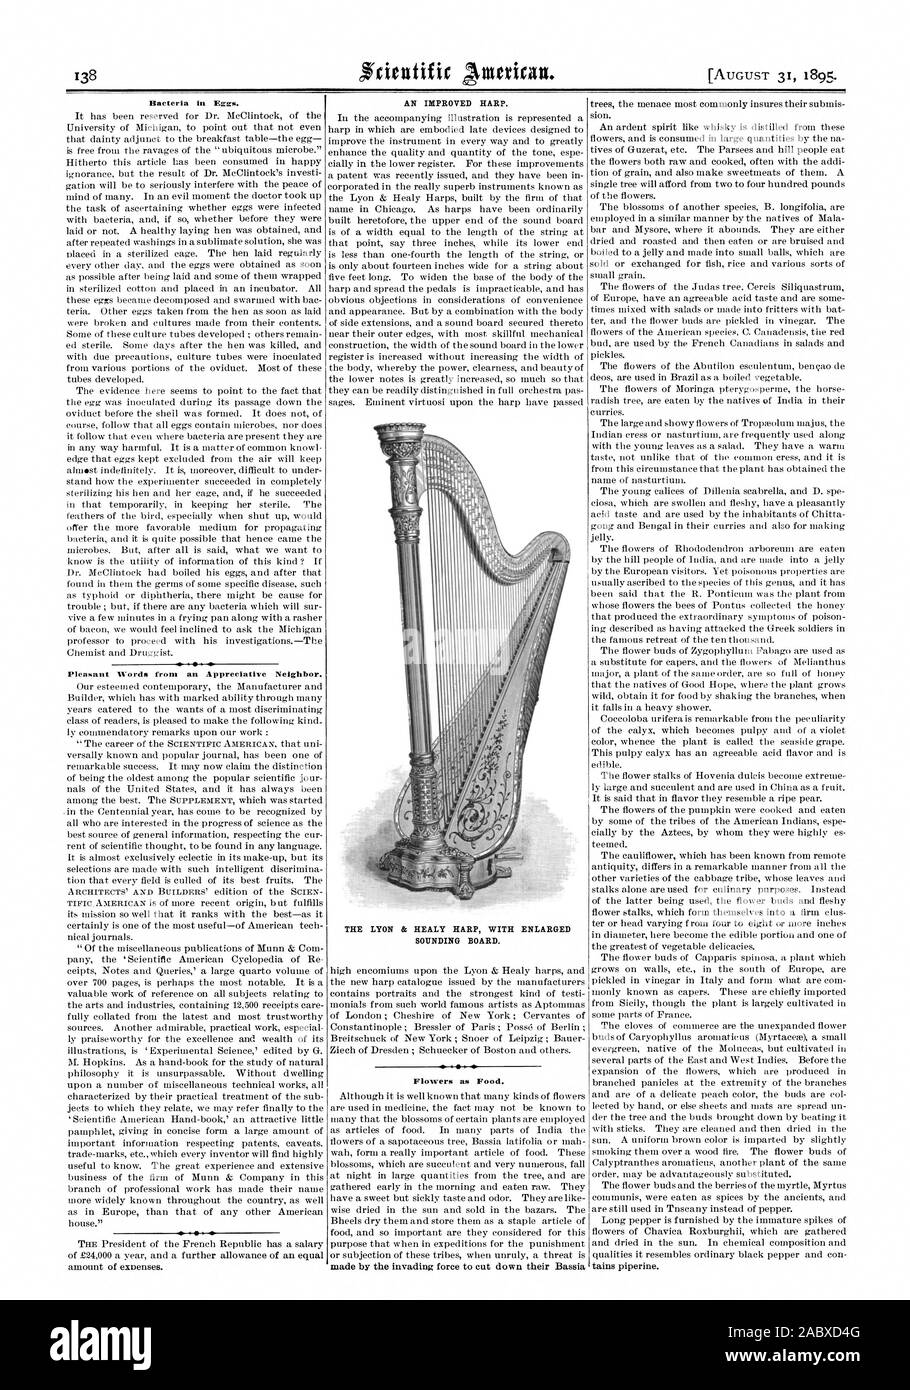 AN IMPROVED HARP. THE LYON & HEALY HARP WITH ENLARGED SOUNDING BOARD., scientific american, 1895-08-31 Stock Photo